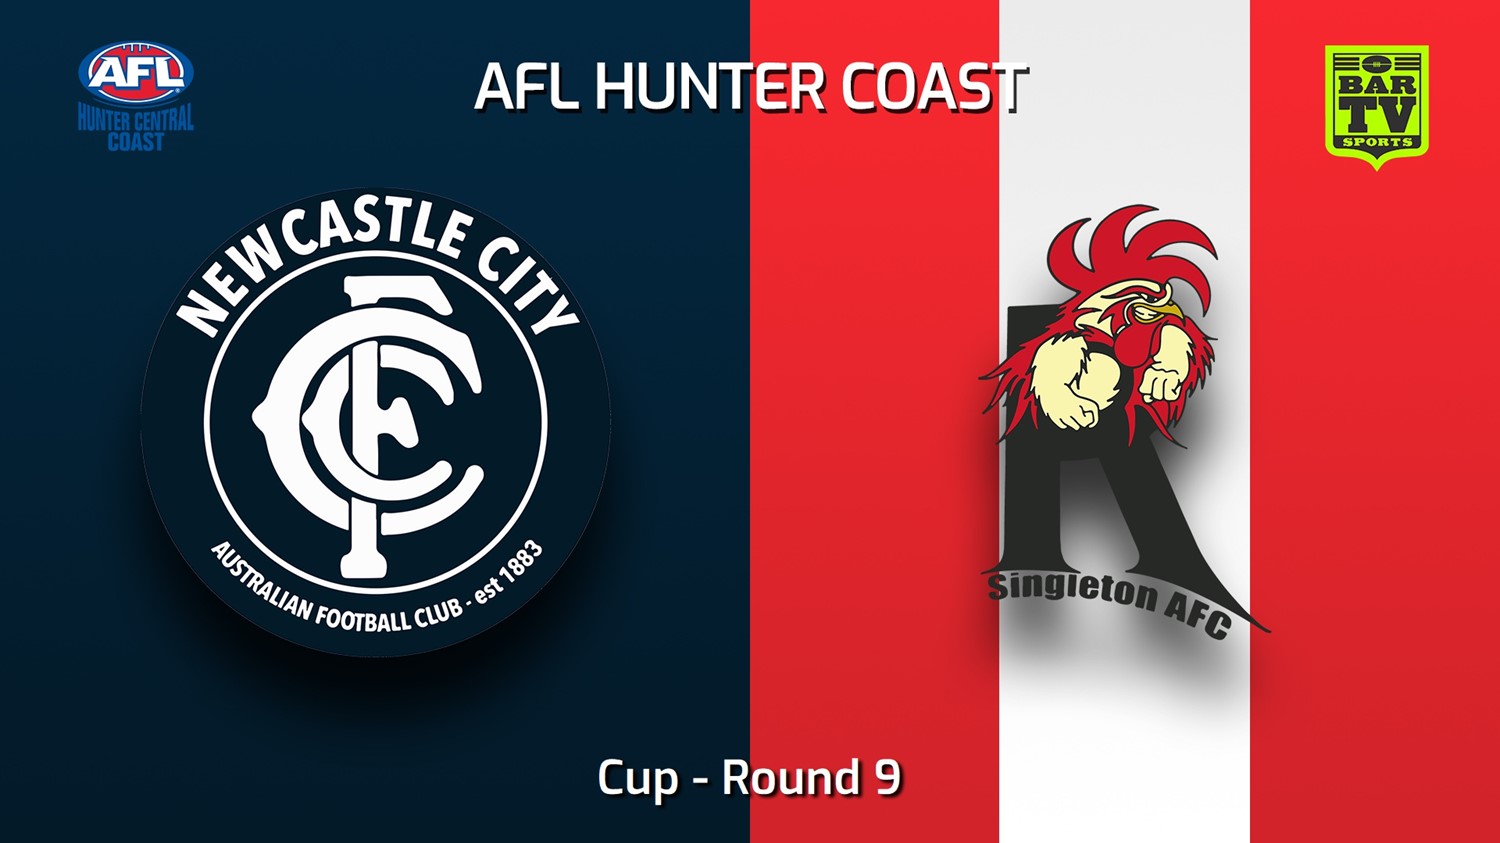 230603-AFL Hunter Central Coast Round 9 - Cup - Newcastle City  v Singleton Roosters Minigame Slate Image